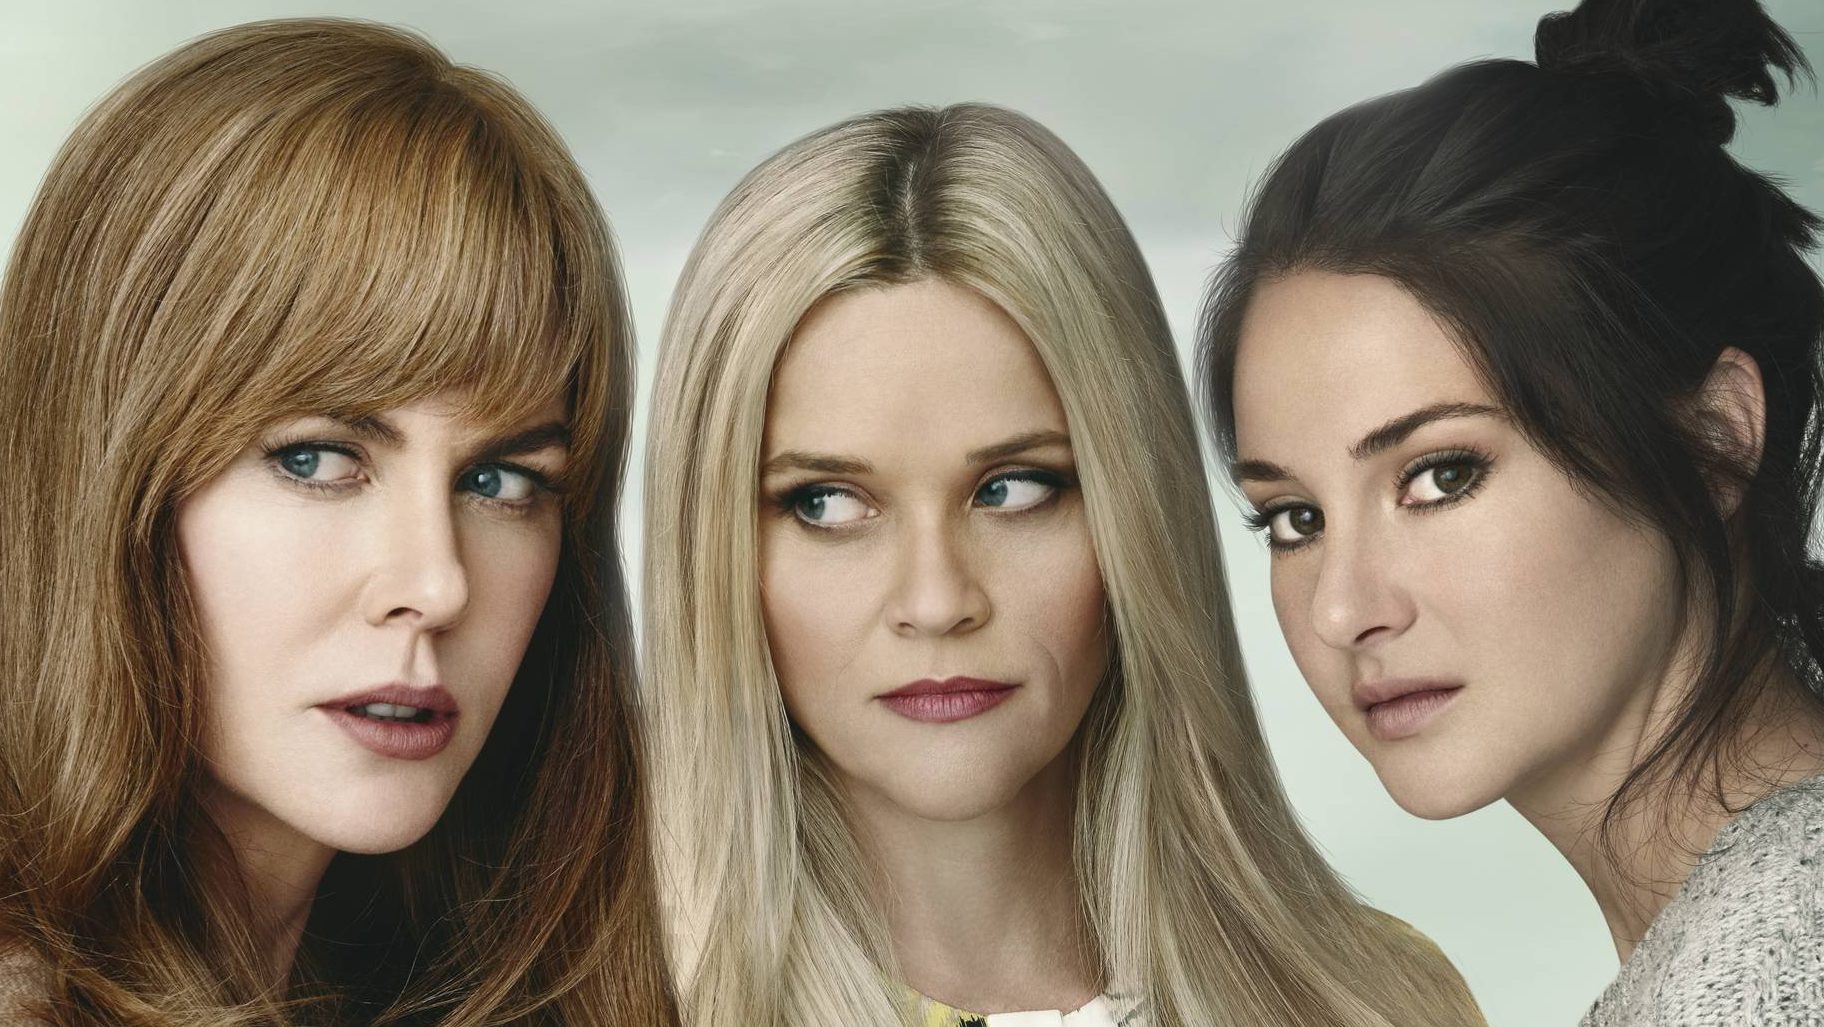 Big Little Lies season 2 coming soon: Meryl Streep signs the script without reading